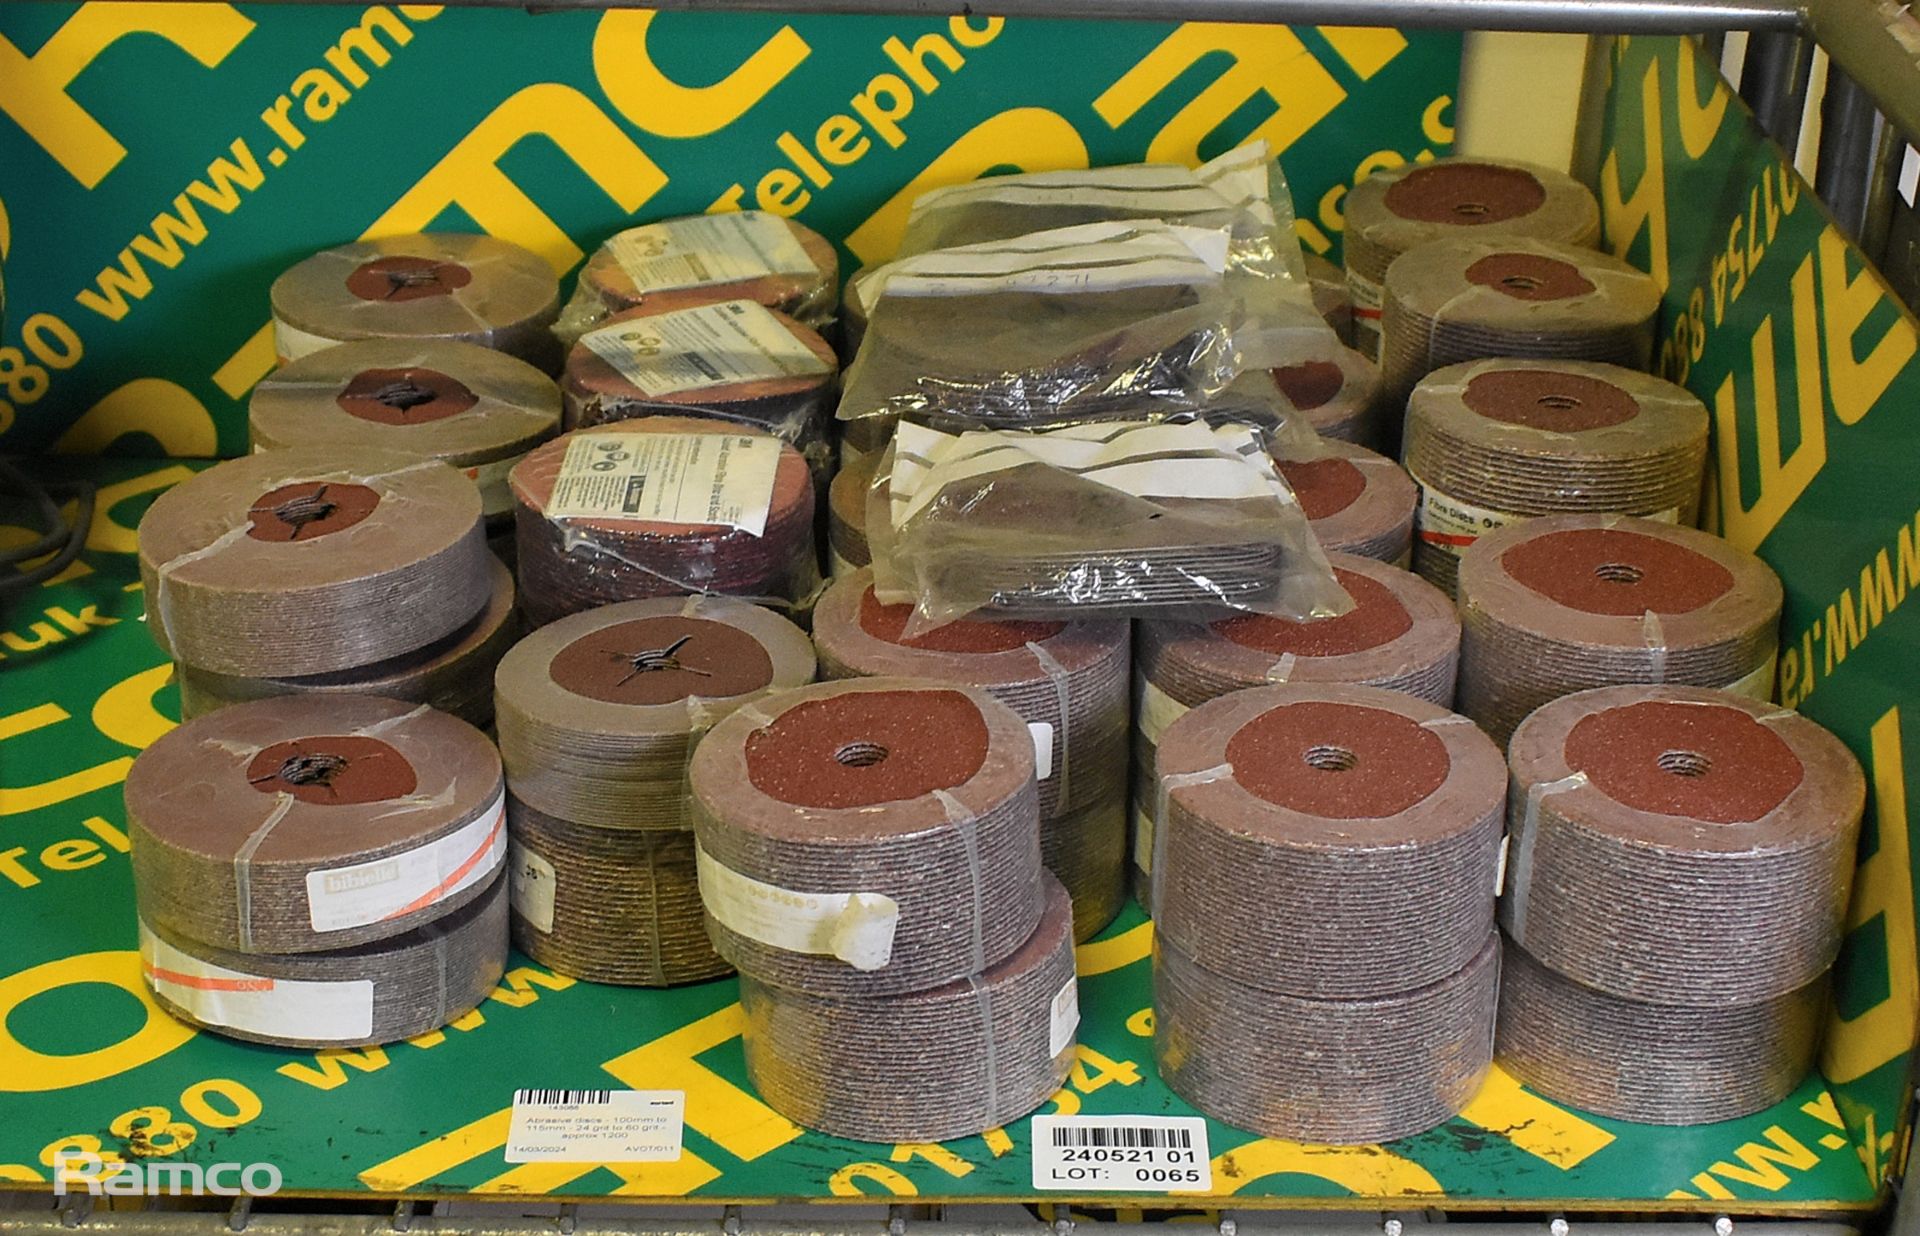 Abrasive discs - 100mm to 115mm - 24 grit to 60 grit - approx 1200 discs